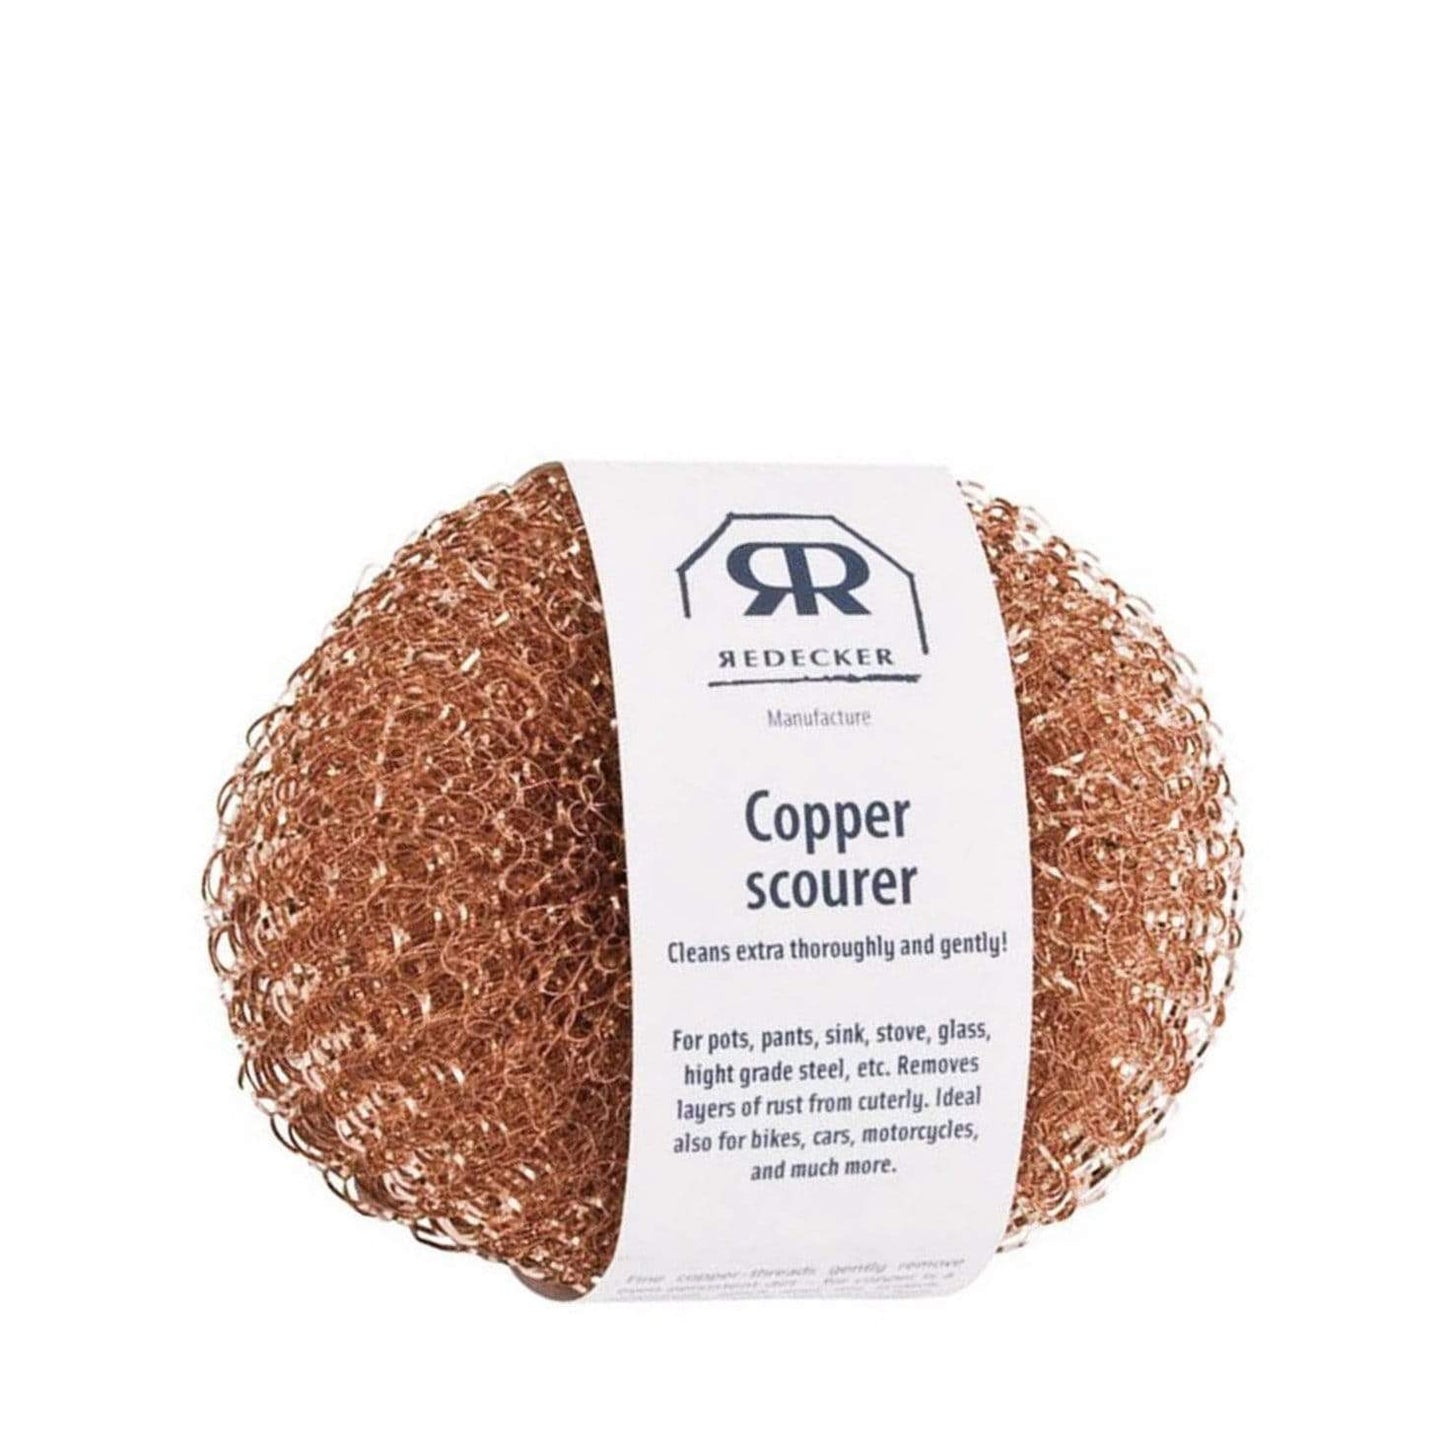 Redecker Copper Scourer set of 2 Eclectopia Gifts and Specialty Homewares 